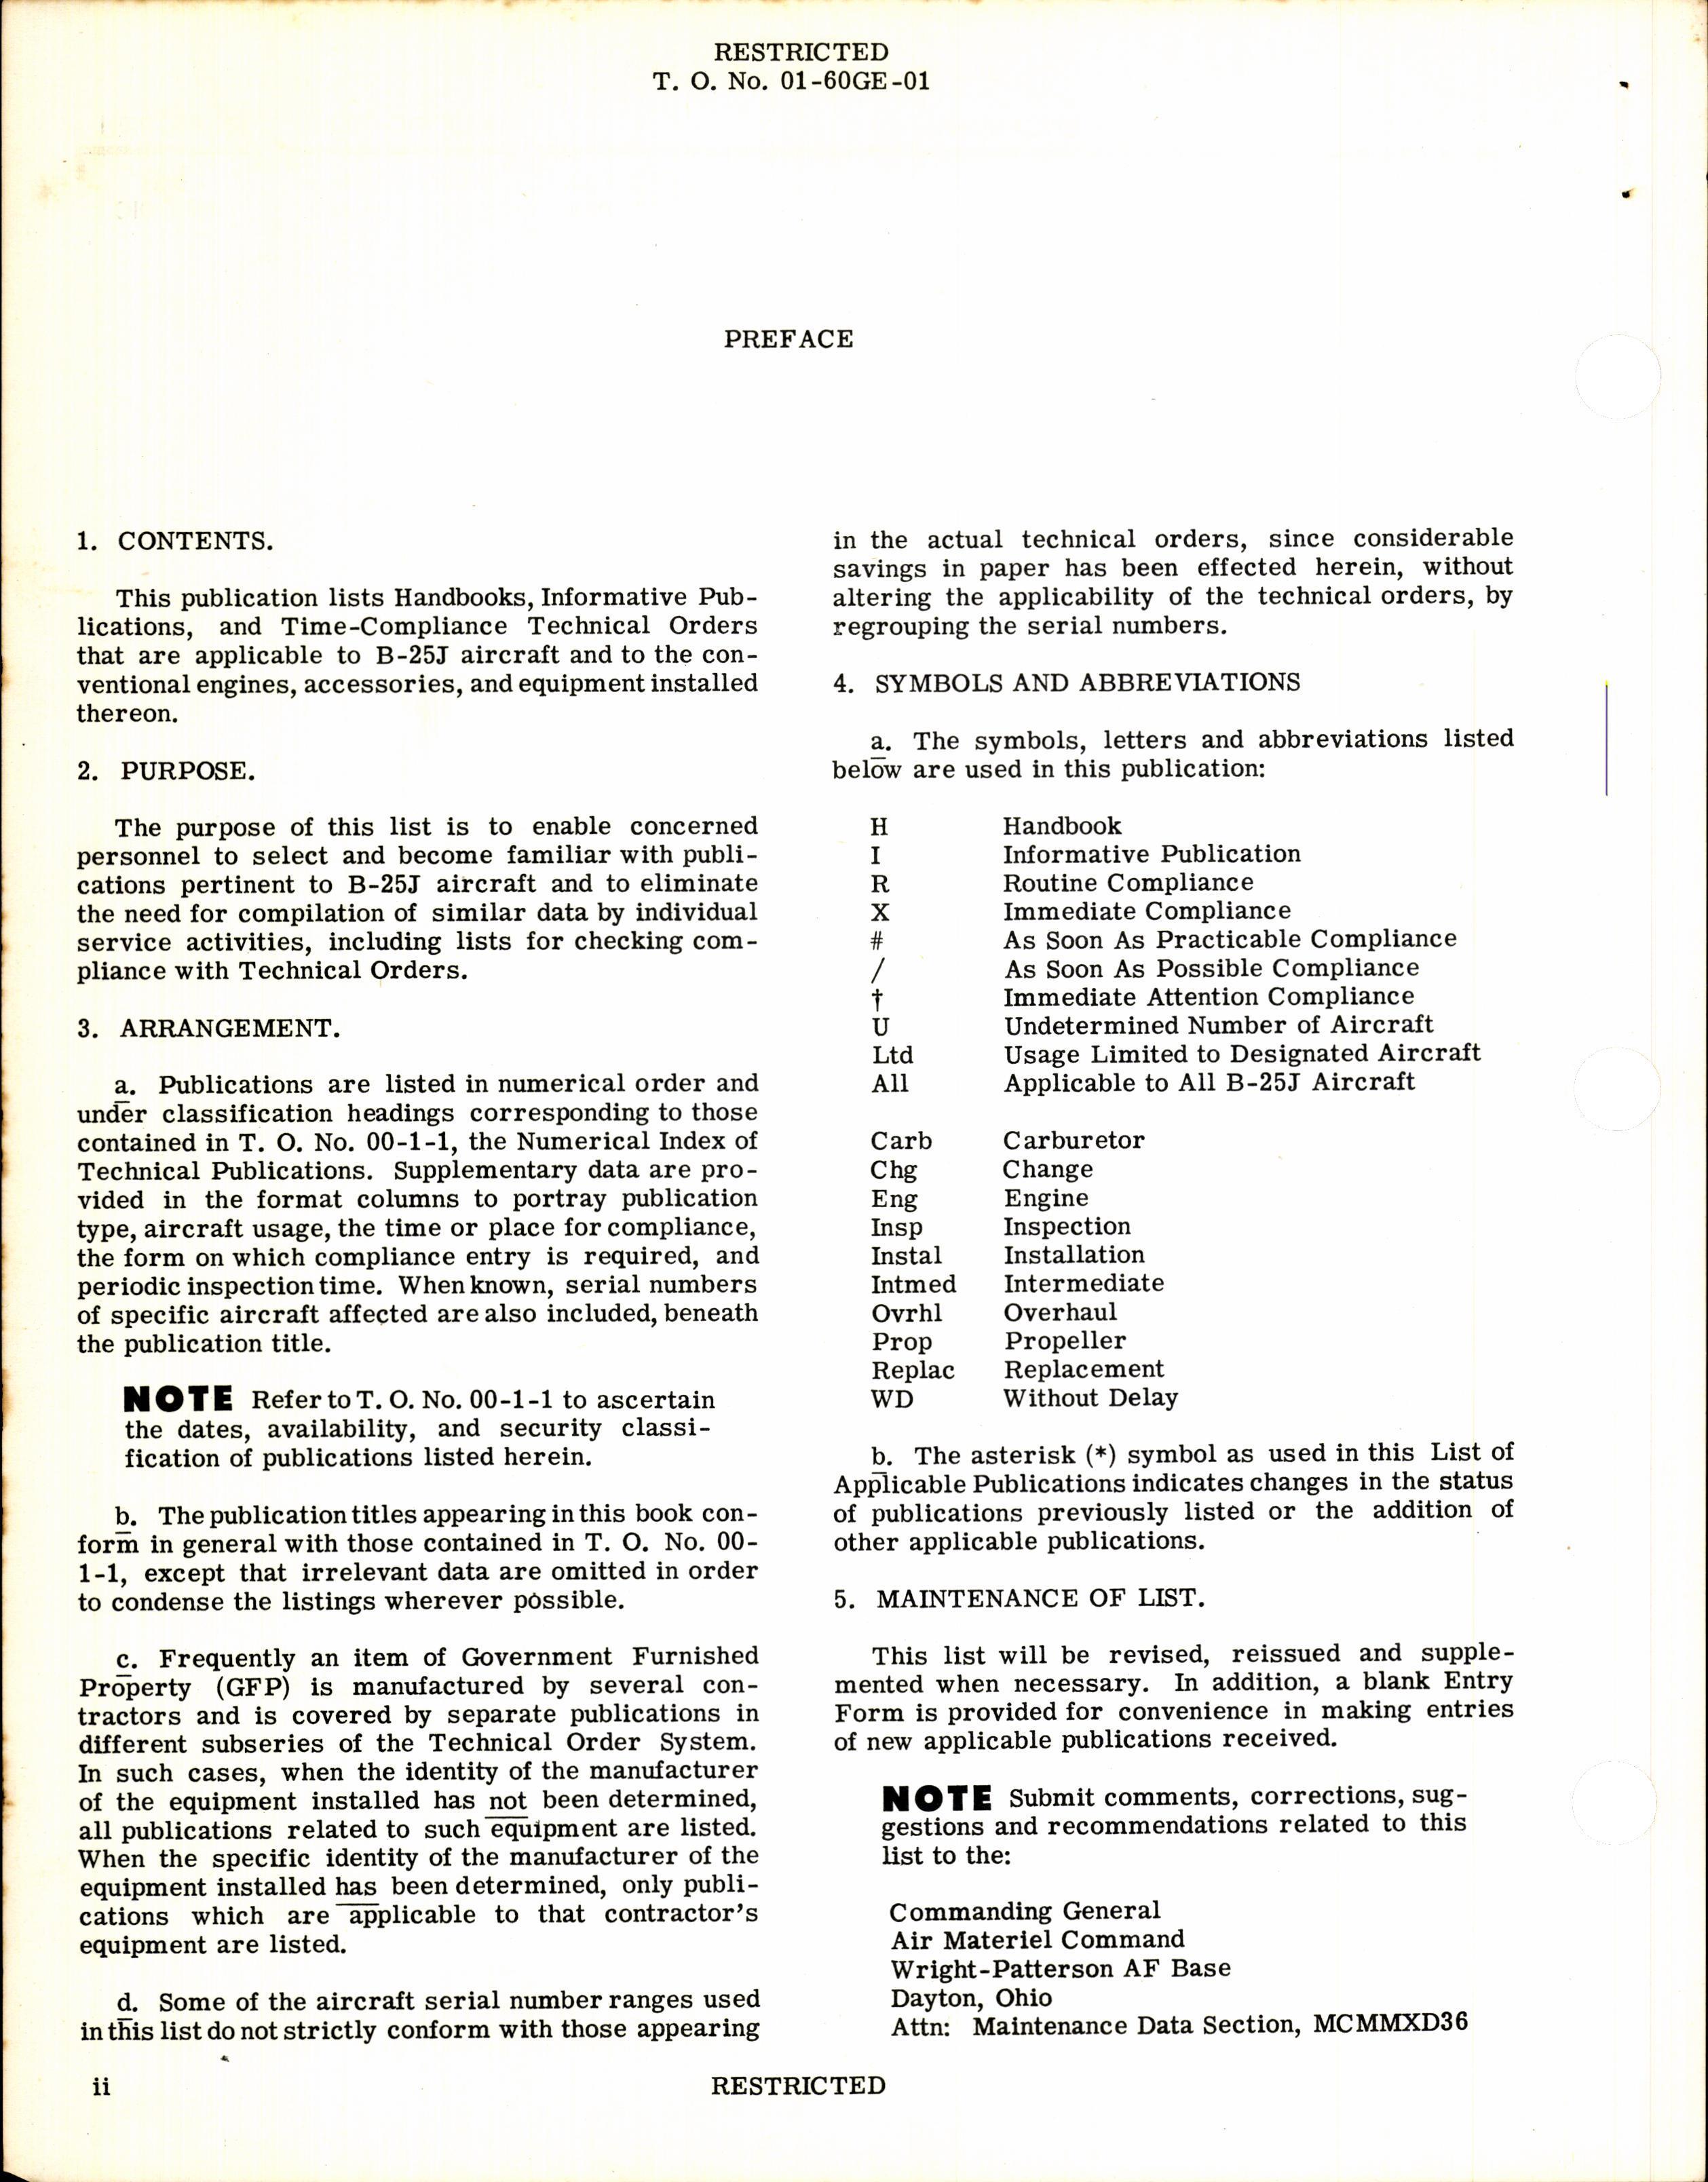 Sample page 4 from AirCorps Library document: List of Applicable Publications for the B-25J (Aircraft & Equipment)